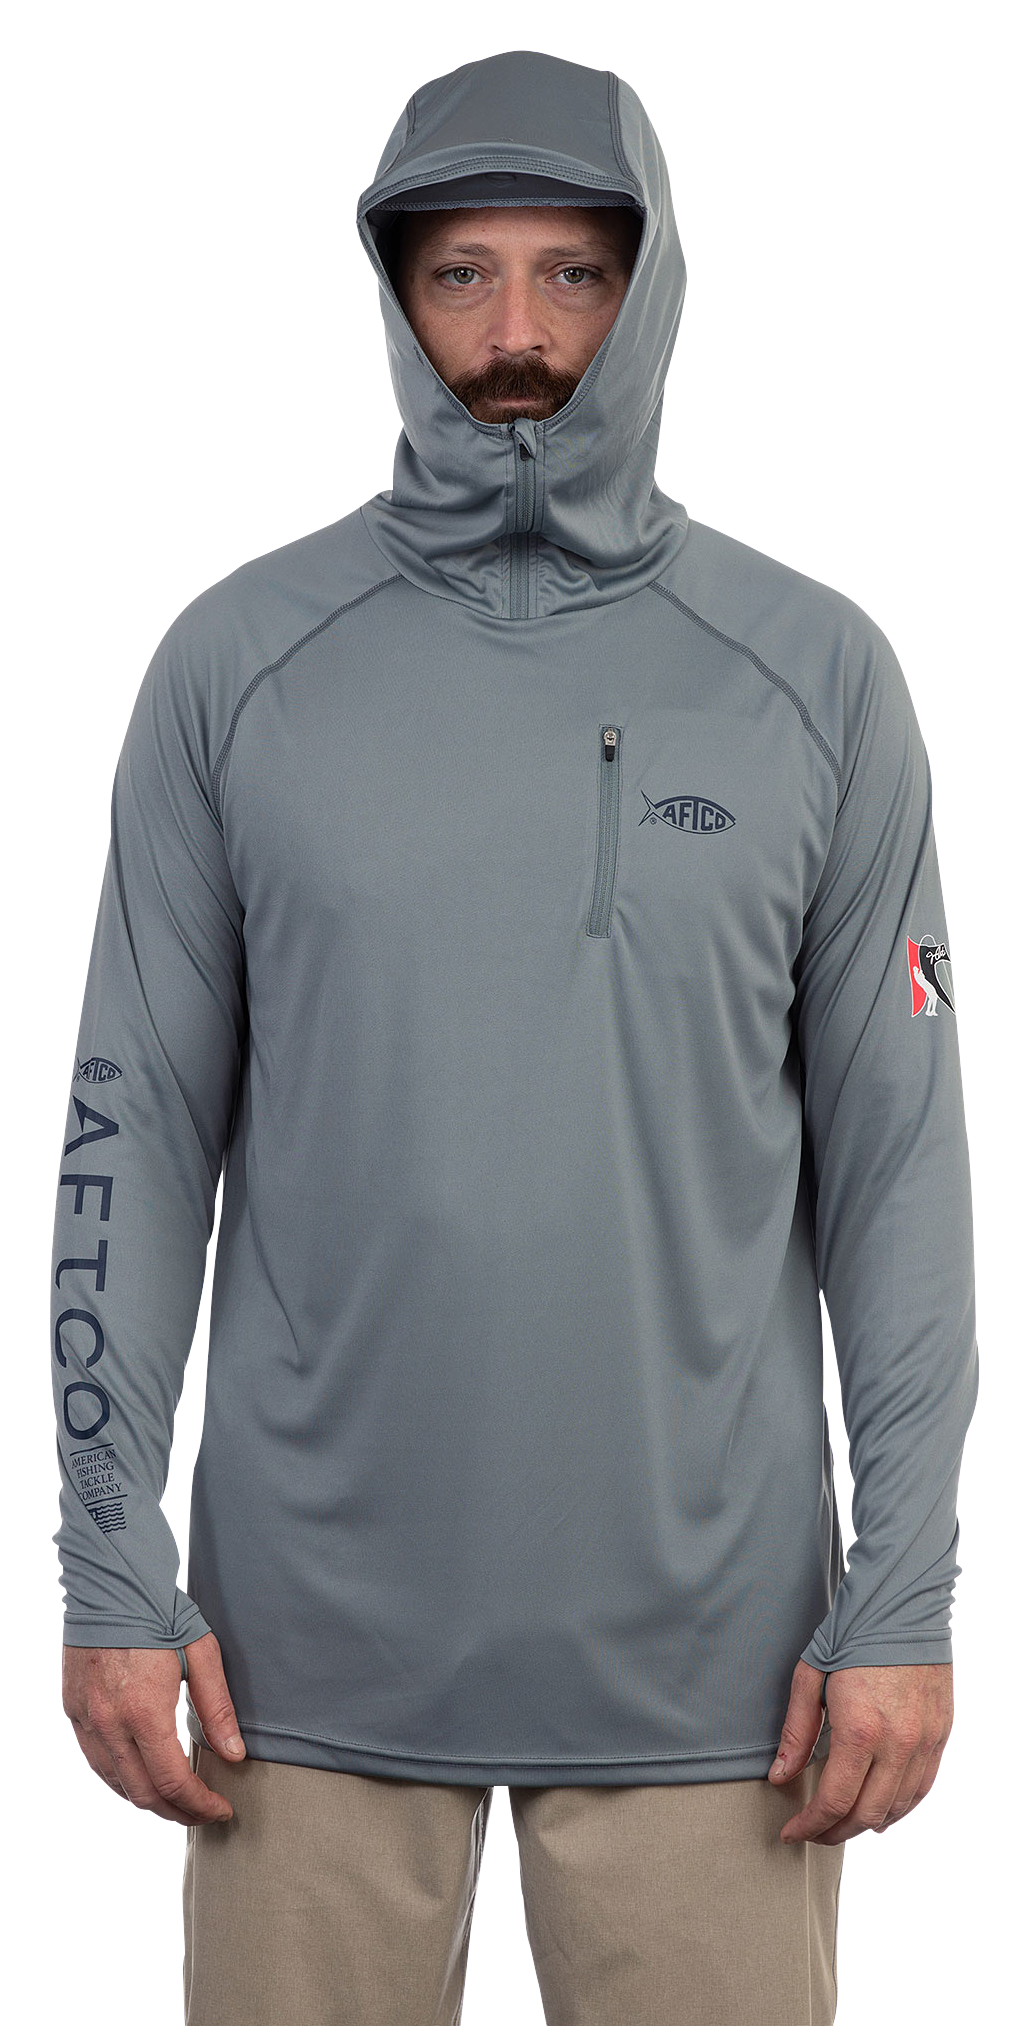 AFTCO Jason Christie Hooded Performance Long-Sleeve Shirt for Men